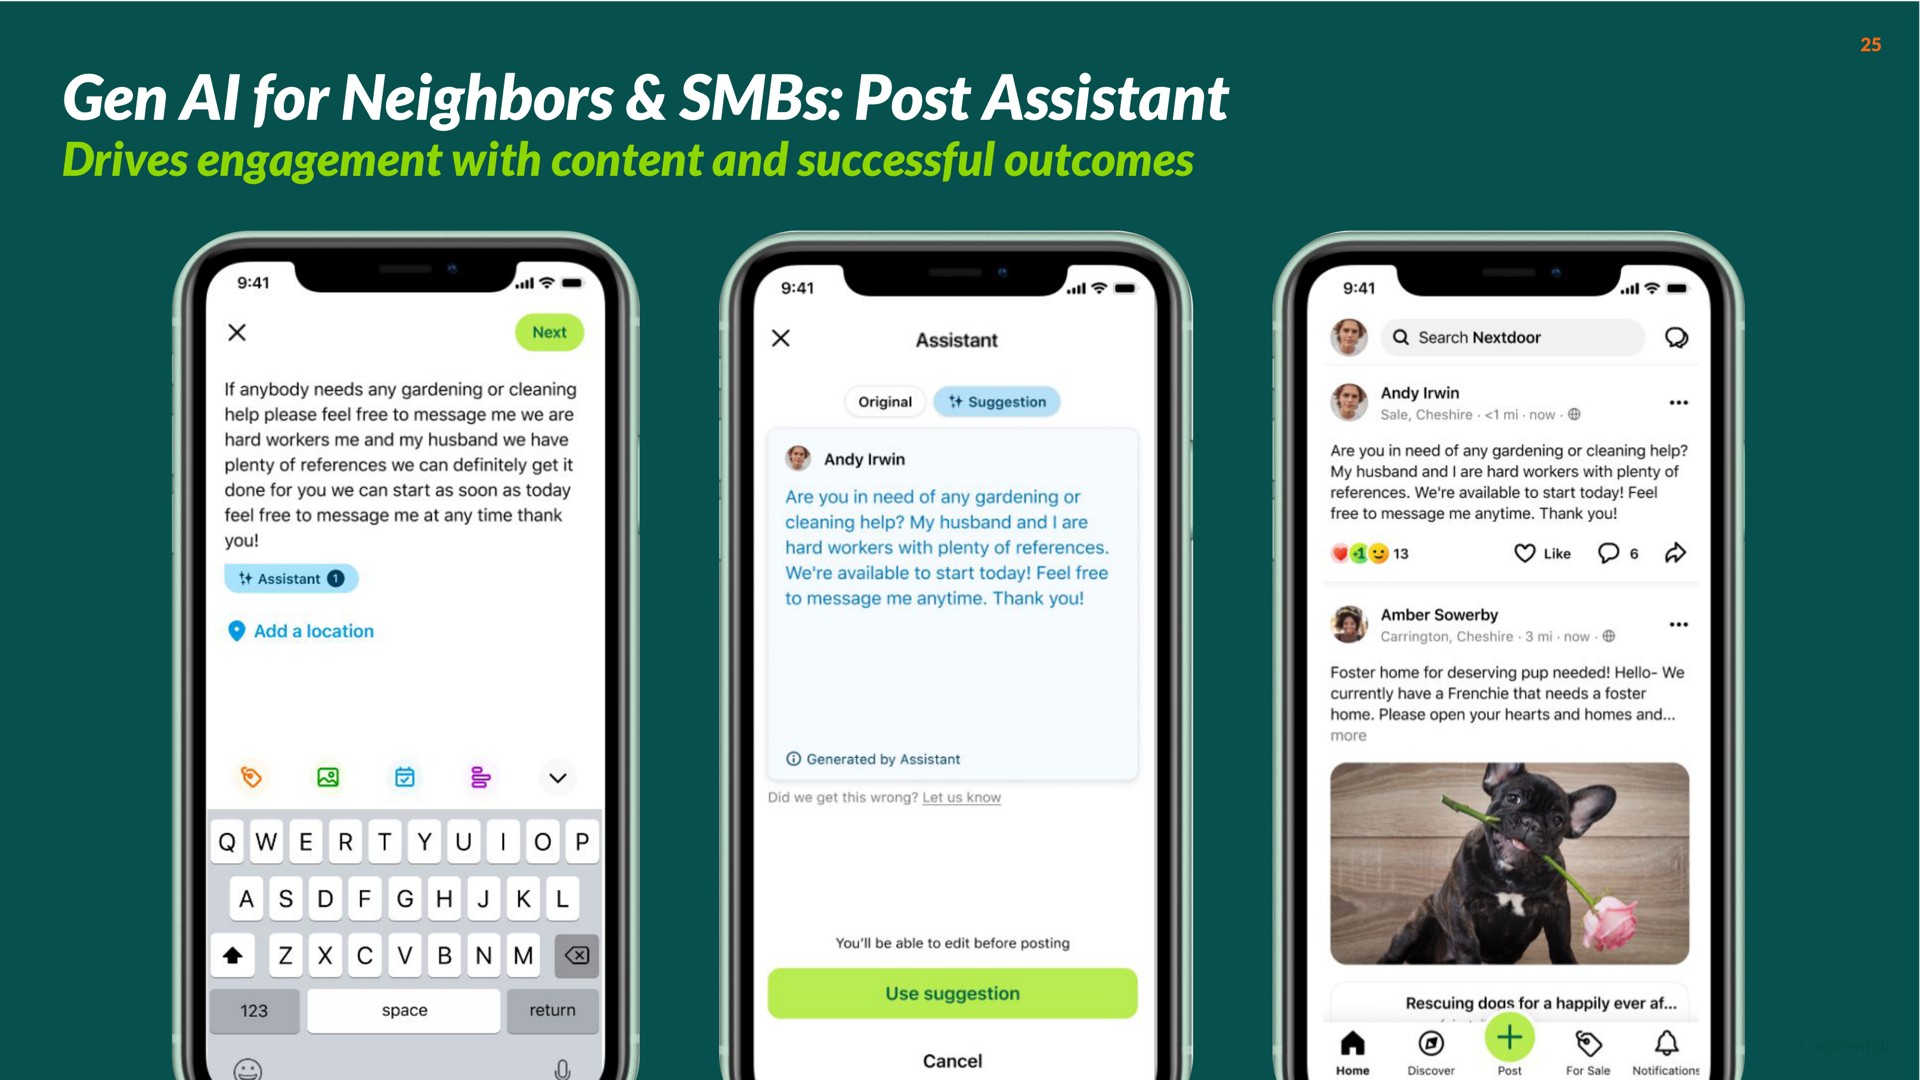 gen for neighbors post assistant drives engagement with content and successful outcomes | Nextdoor